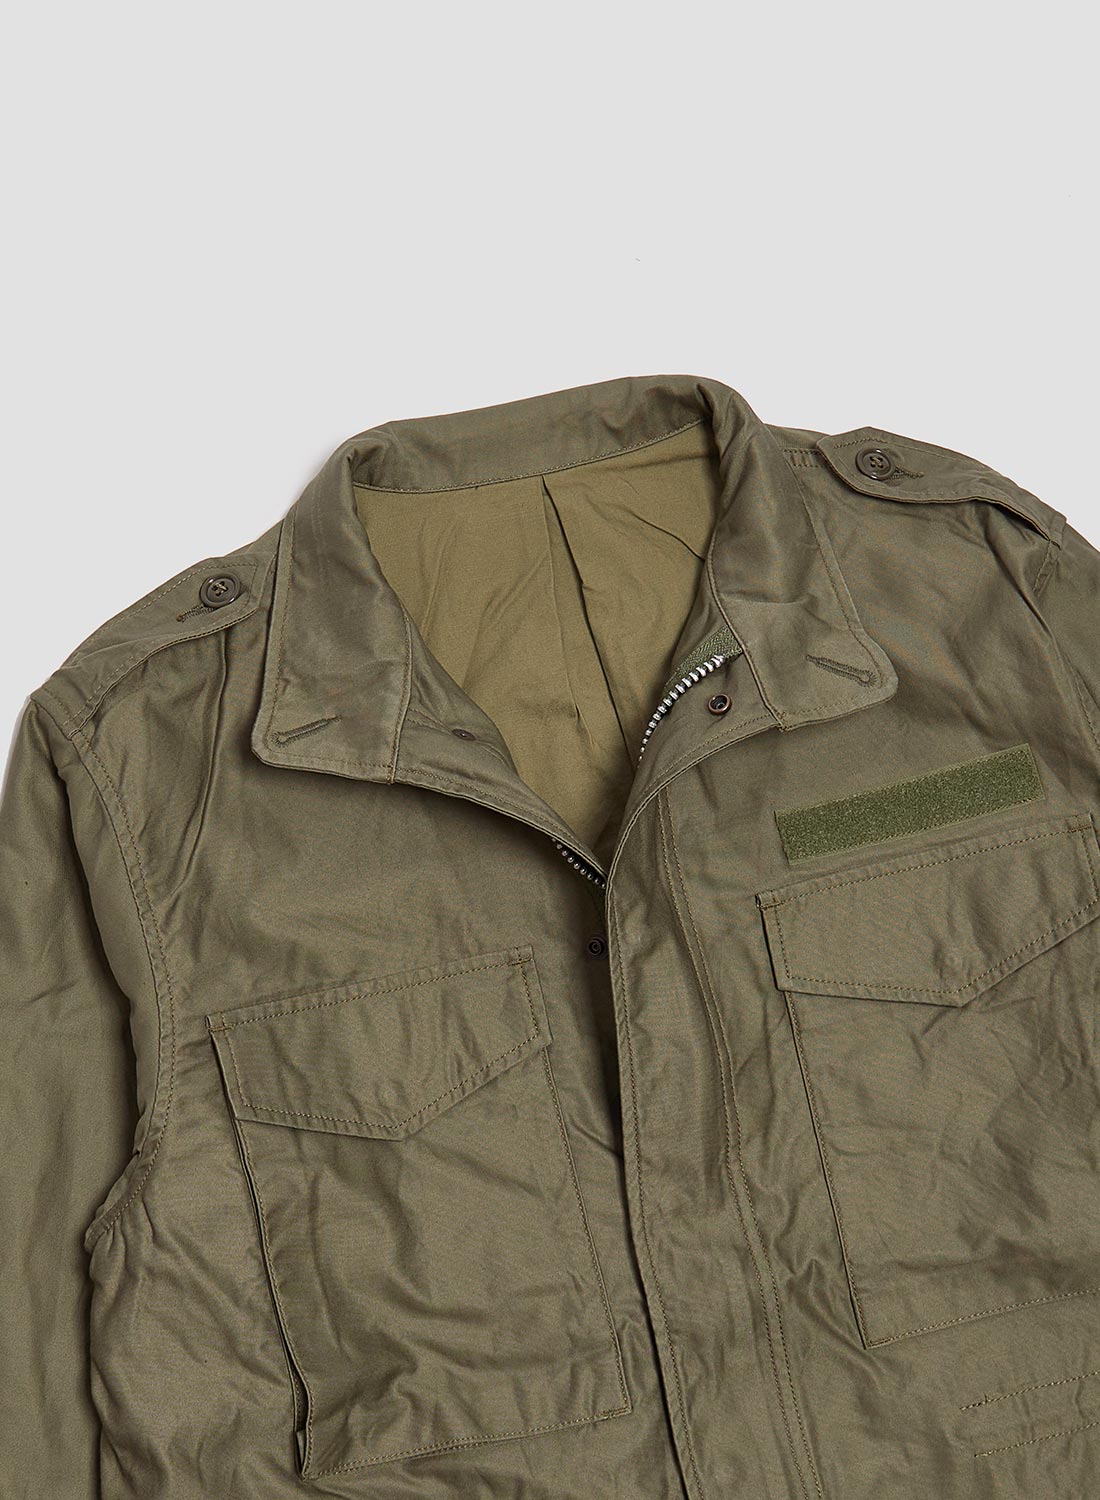 FOB Factory M-65 Field Jacket Olive – Nigel Cabourn